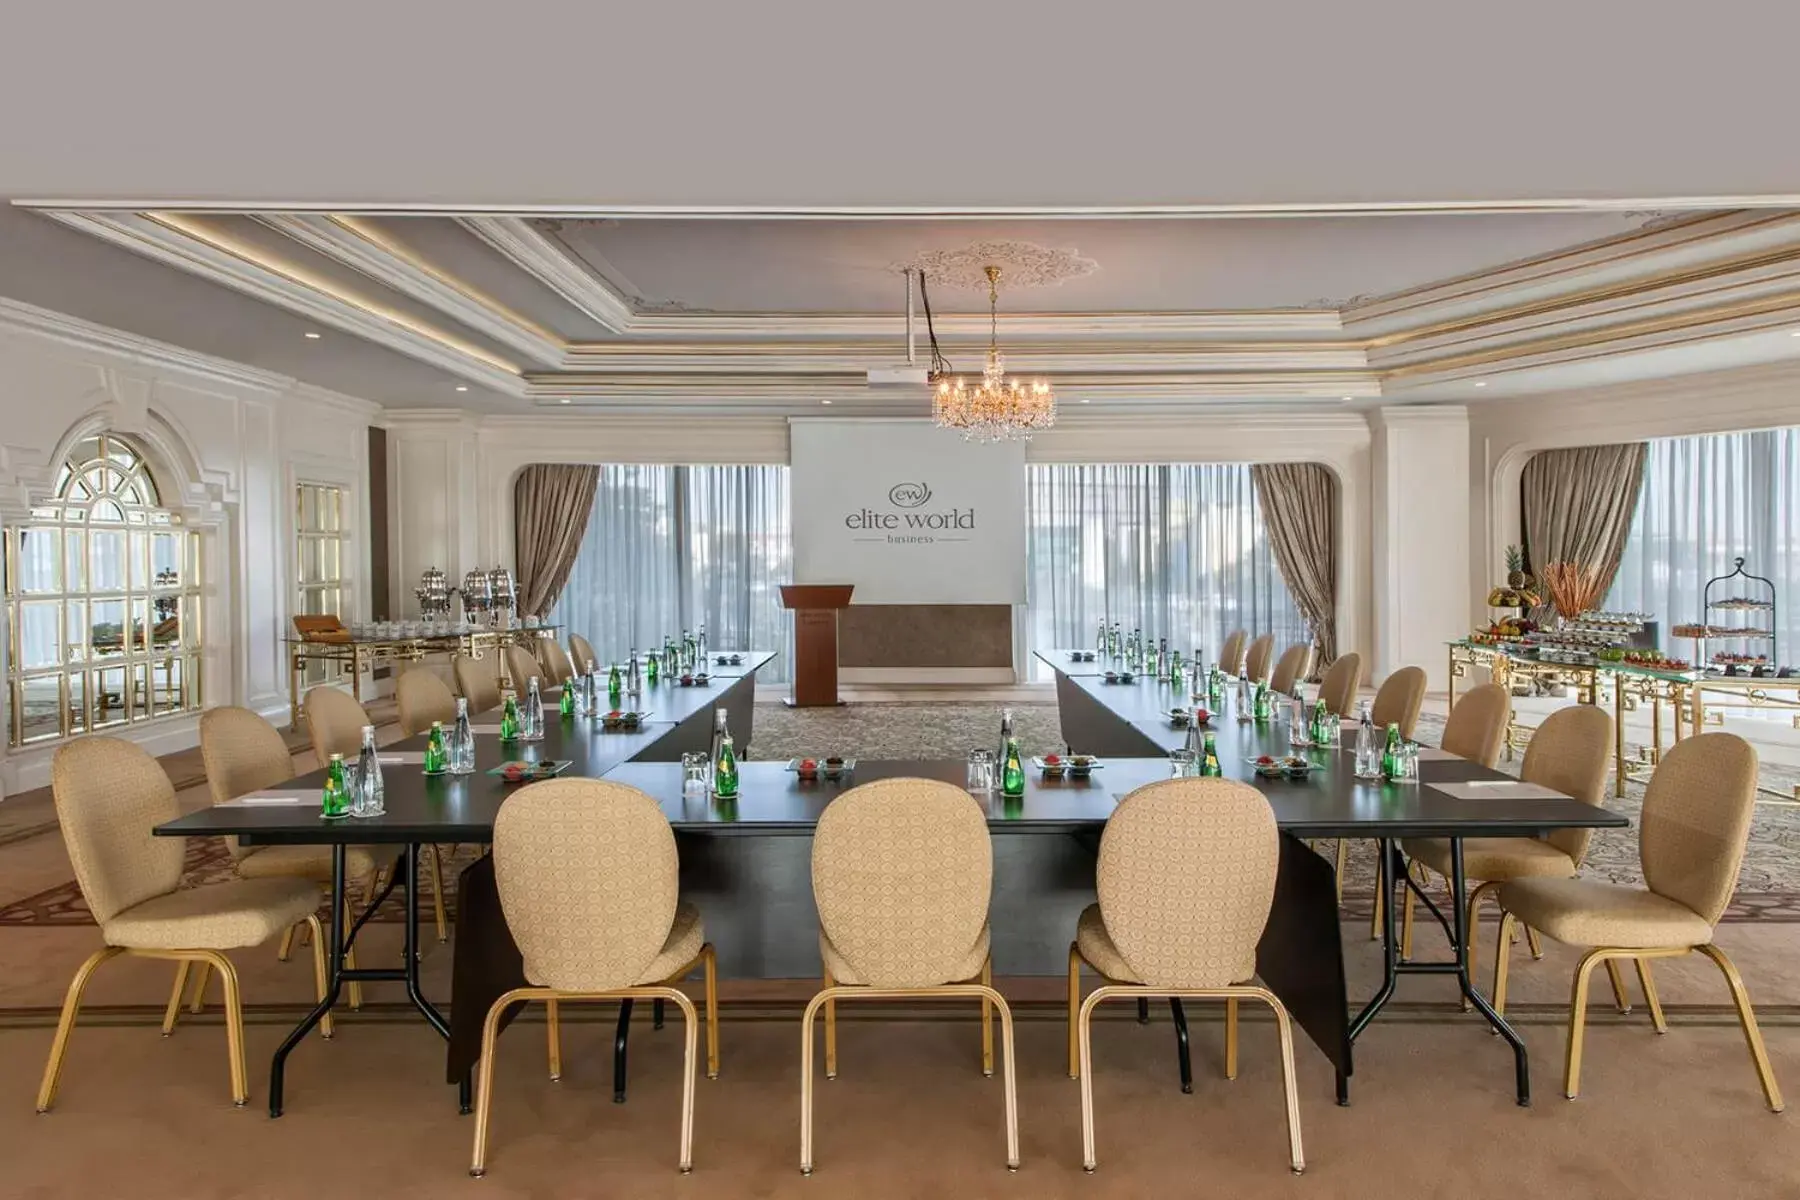 Meeting/conference room in Elite World Istanbul Florya